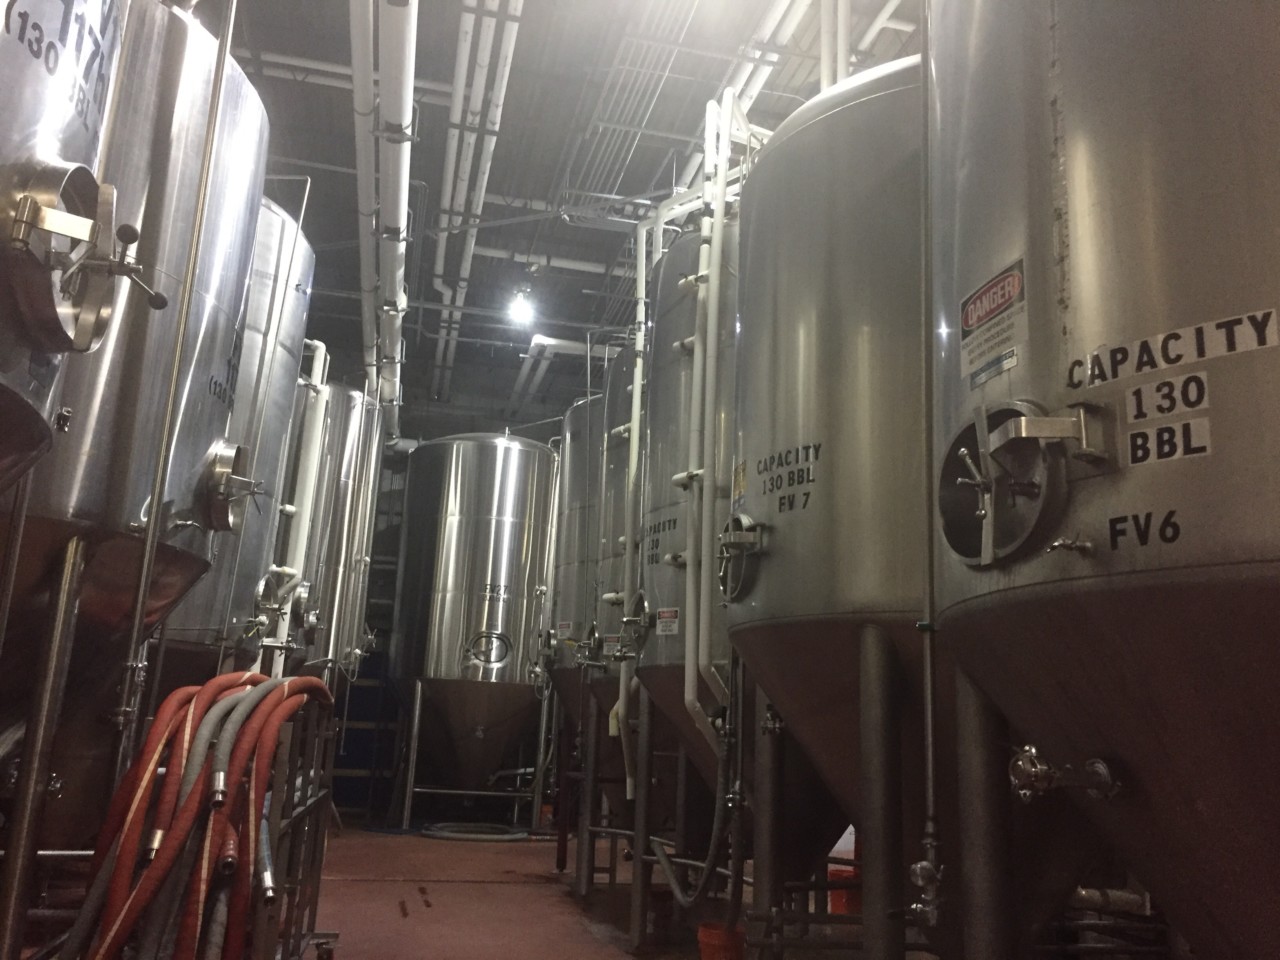 Brewery Vats at Heavy Seas Brewery @ bestwithchocolate.com